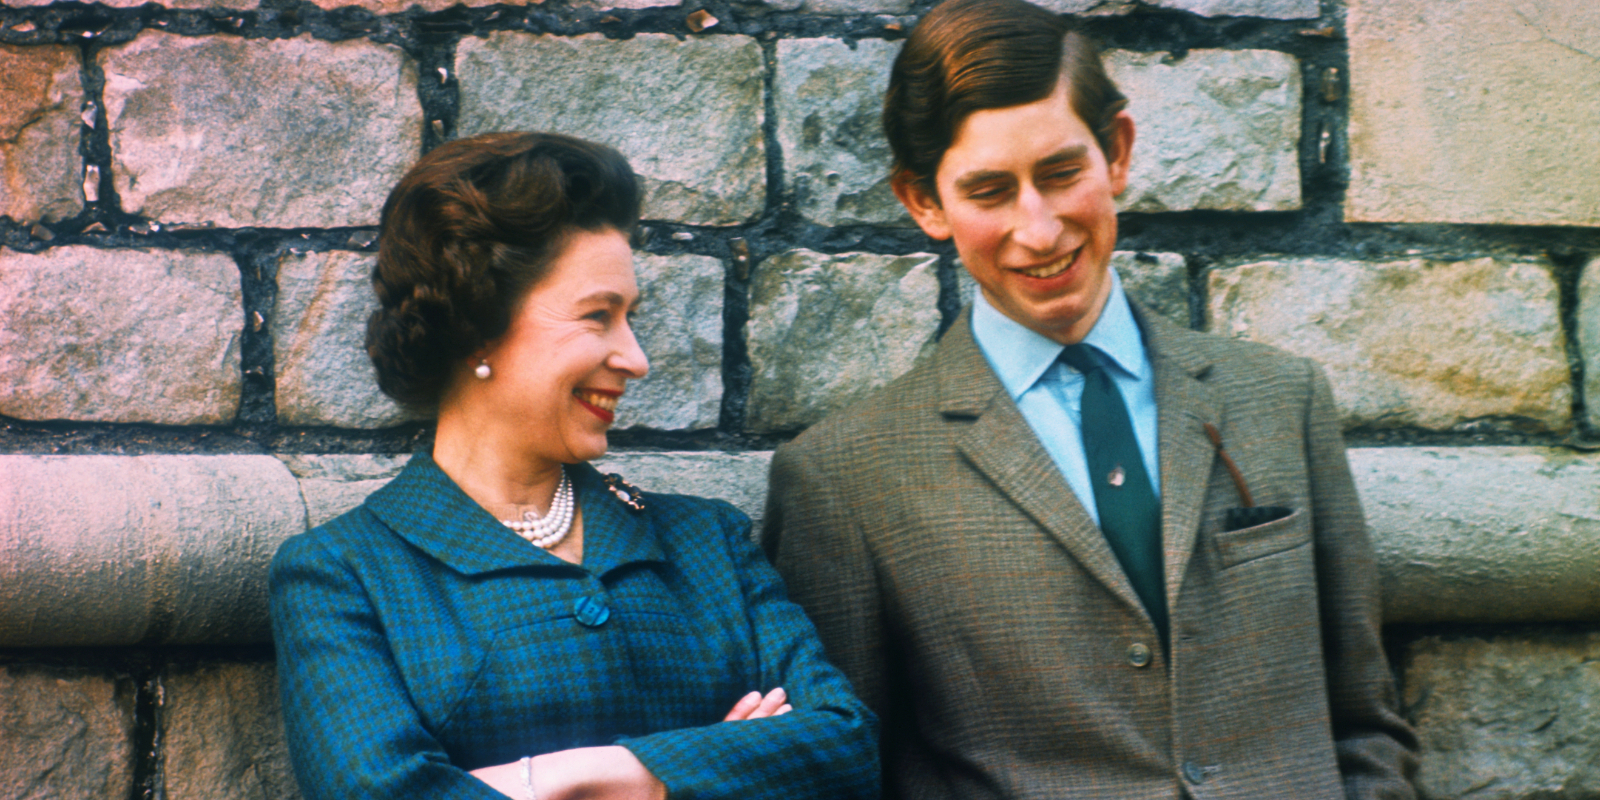 Queen Elizabeth and then-Prince Charles outside of their Windsor home in an older, undated file photo.